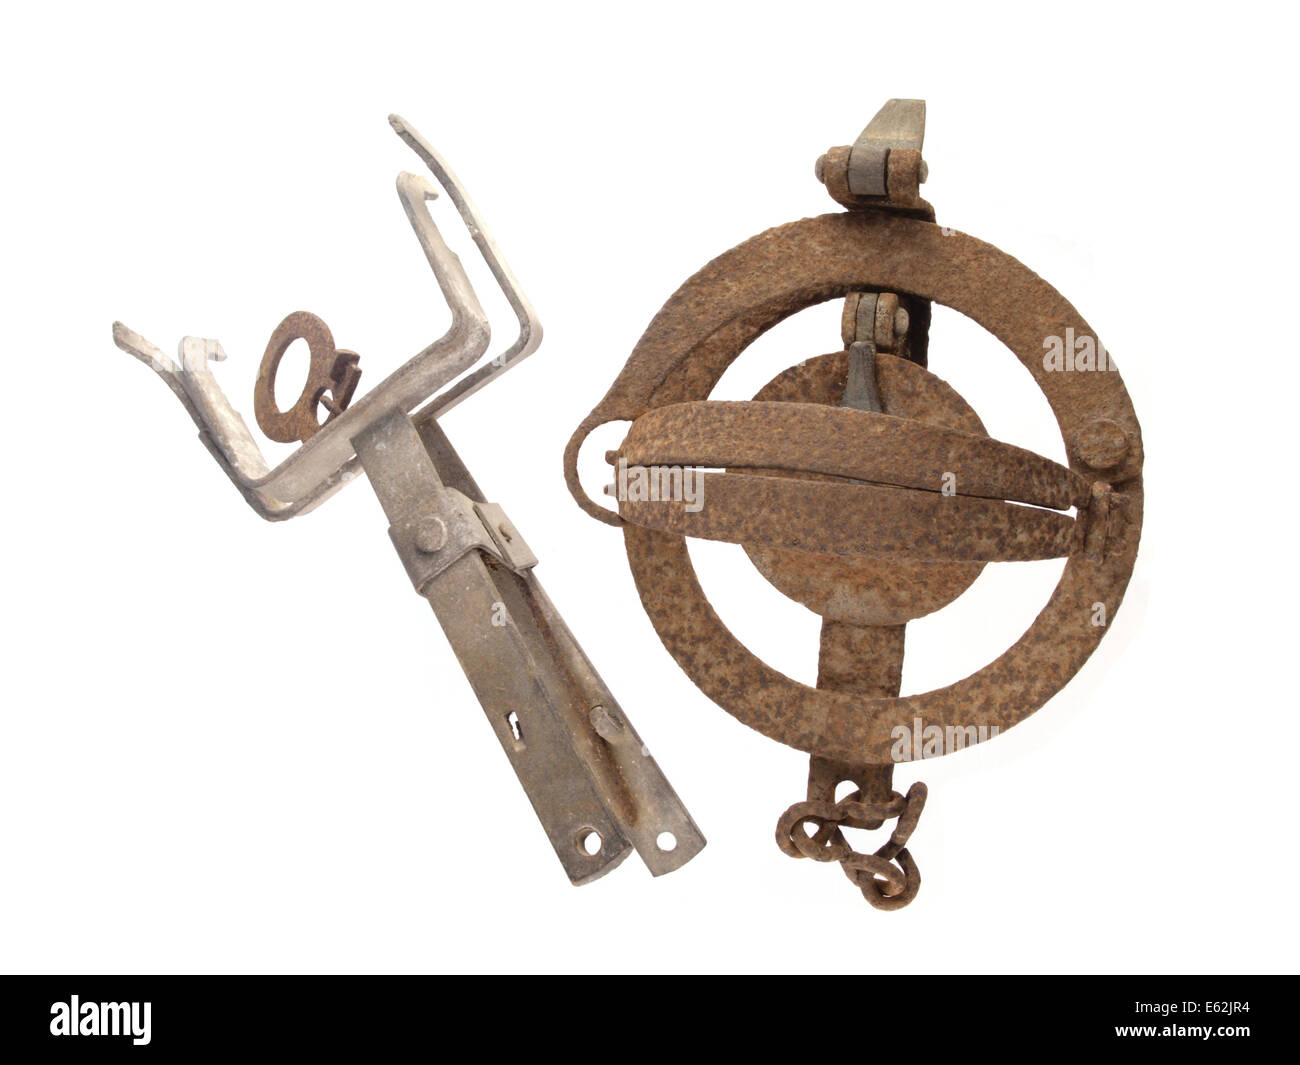 Close up photo of two old and rusty vermin traps on a white background. Stock Photo